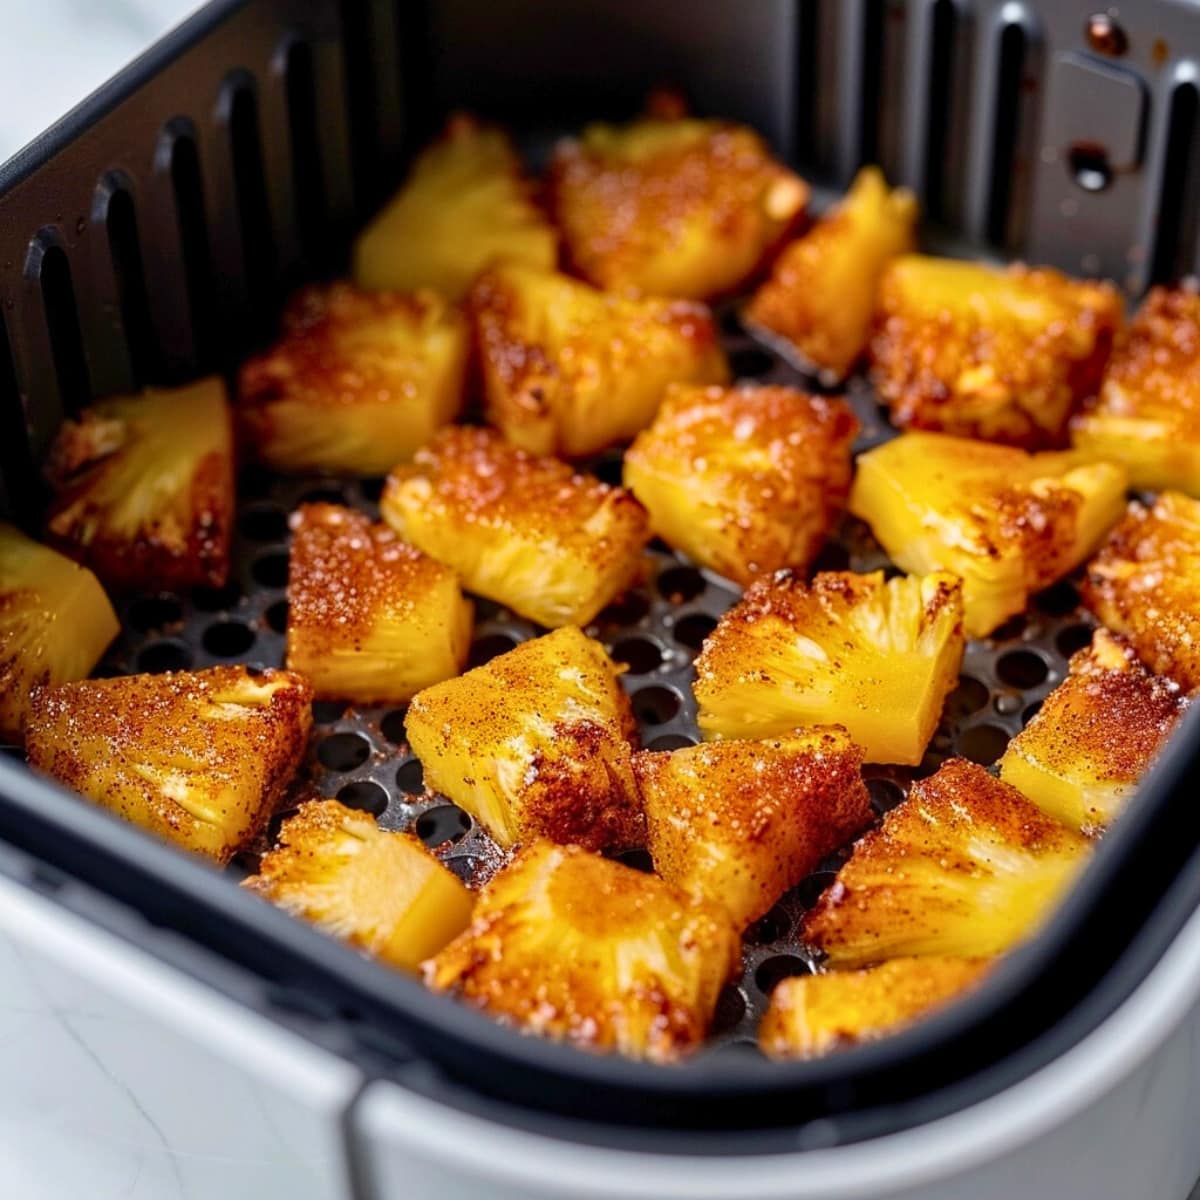 Bite size pineapple coated with cinnamon sugar inside an air fryer.